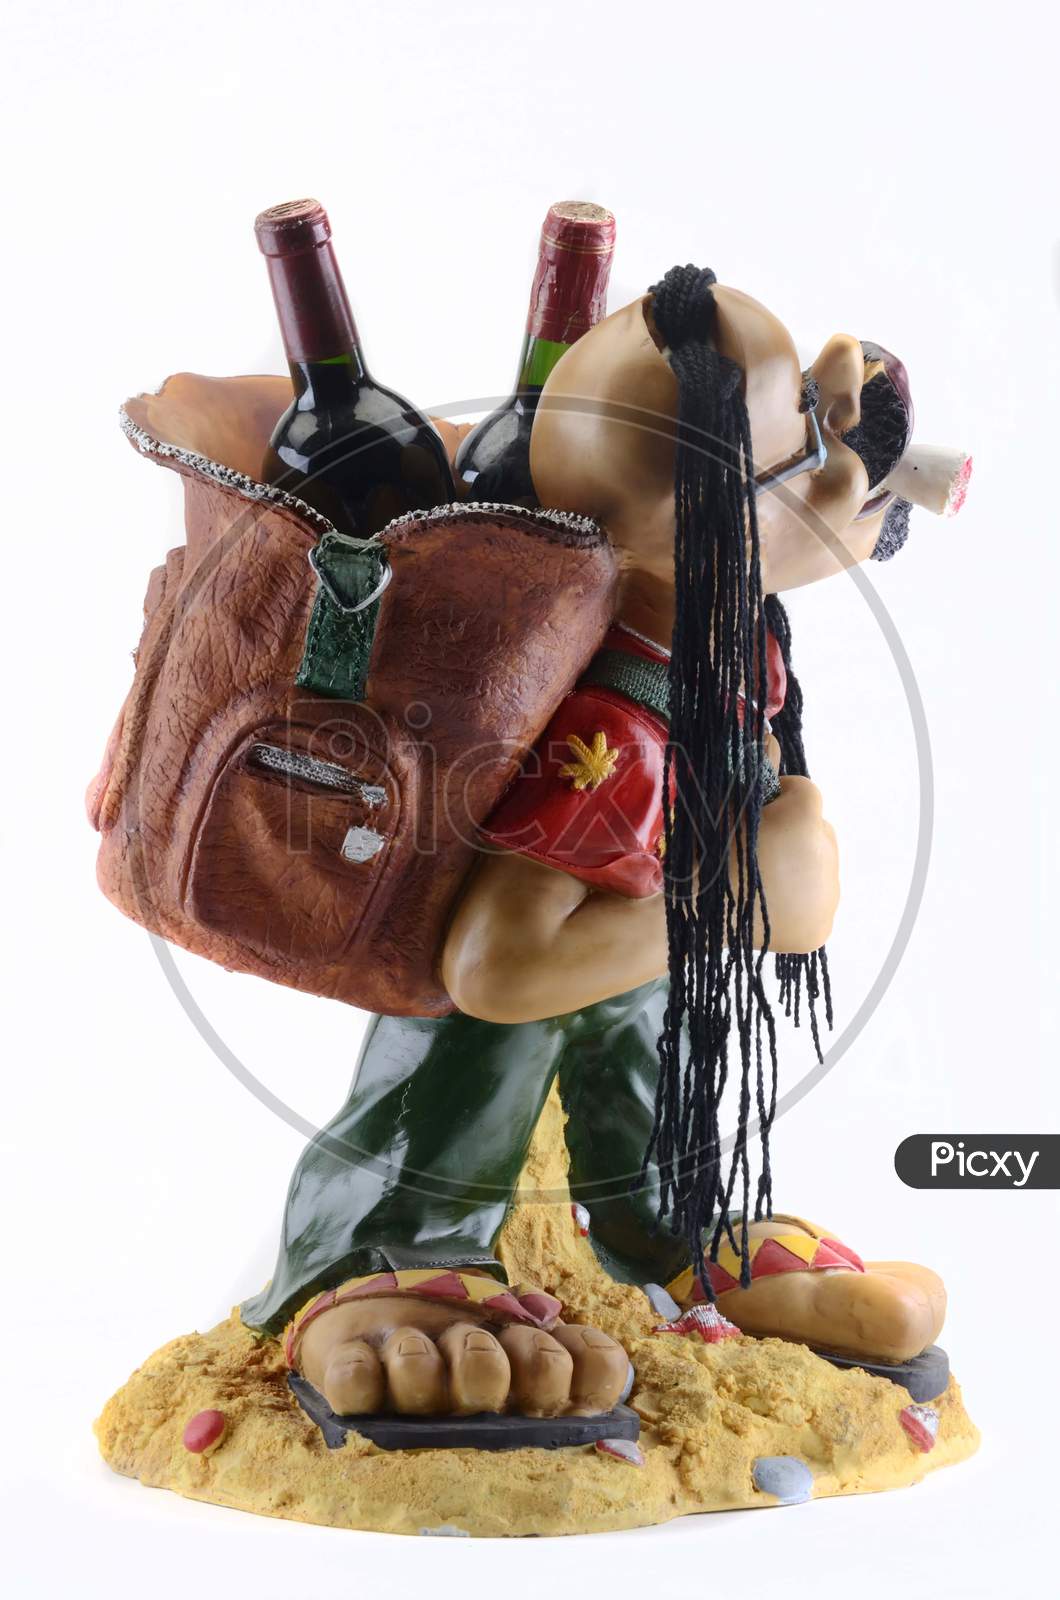 Action Figure Or Toy of a Man Carrying Wine Bottles In Backpack  Over an Isolated White Background